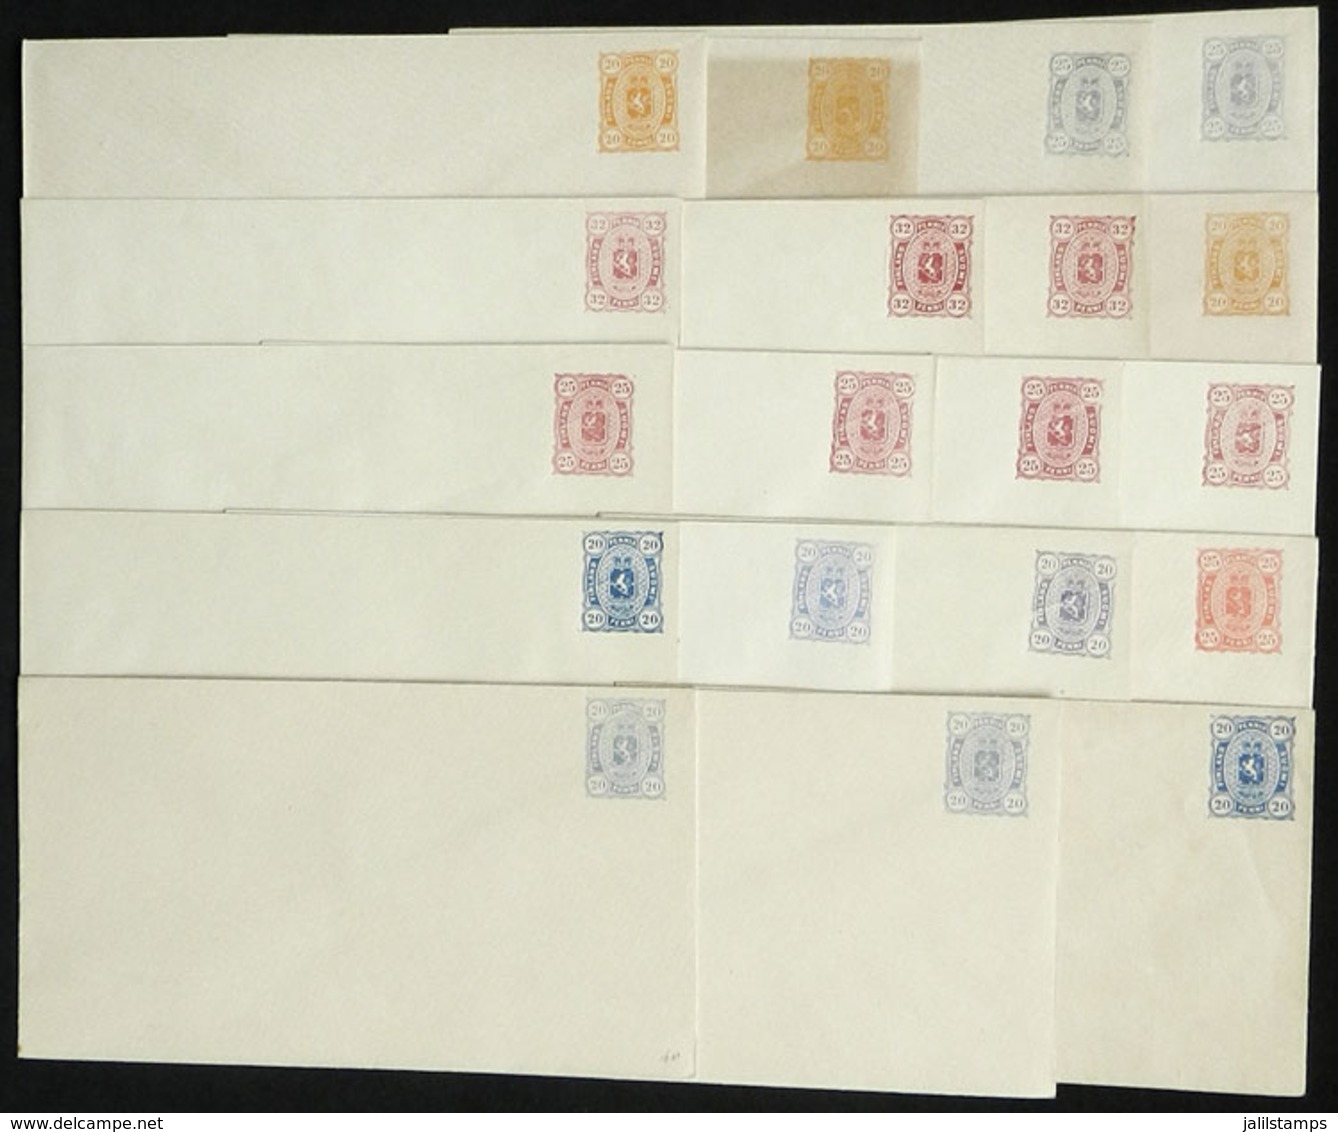 FINLAND: 20 Very Old Stationery Envelopes, Unused, Excellent Quality. There Are Different Colors, Some Rare, High Catalo - Ganzsachen